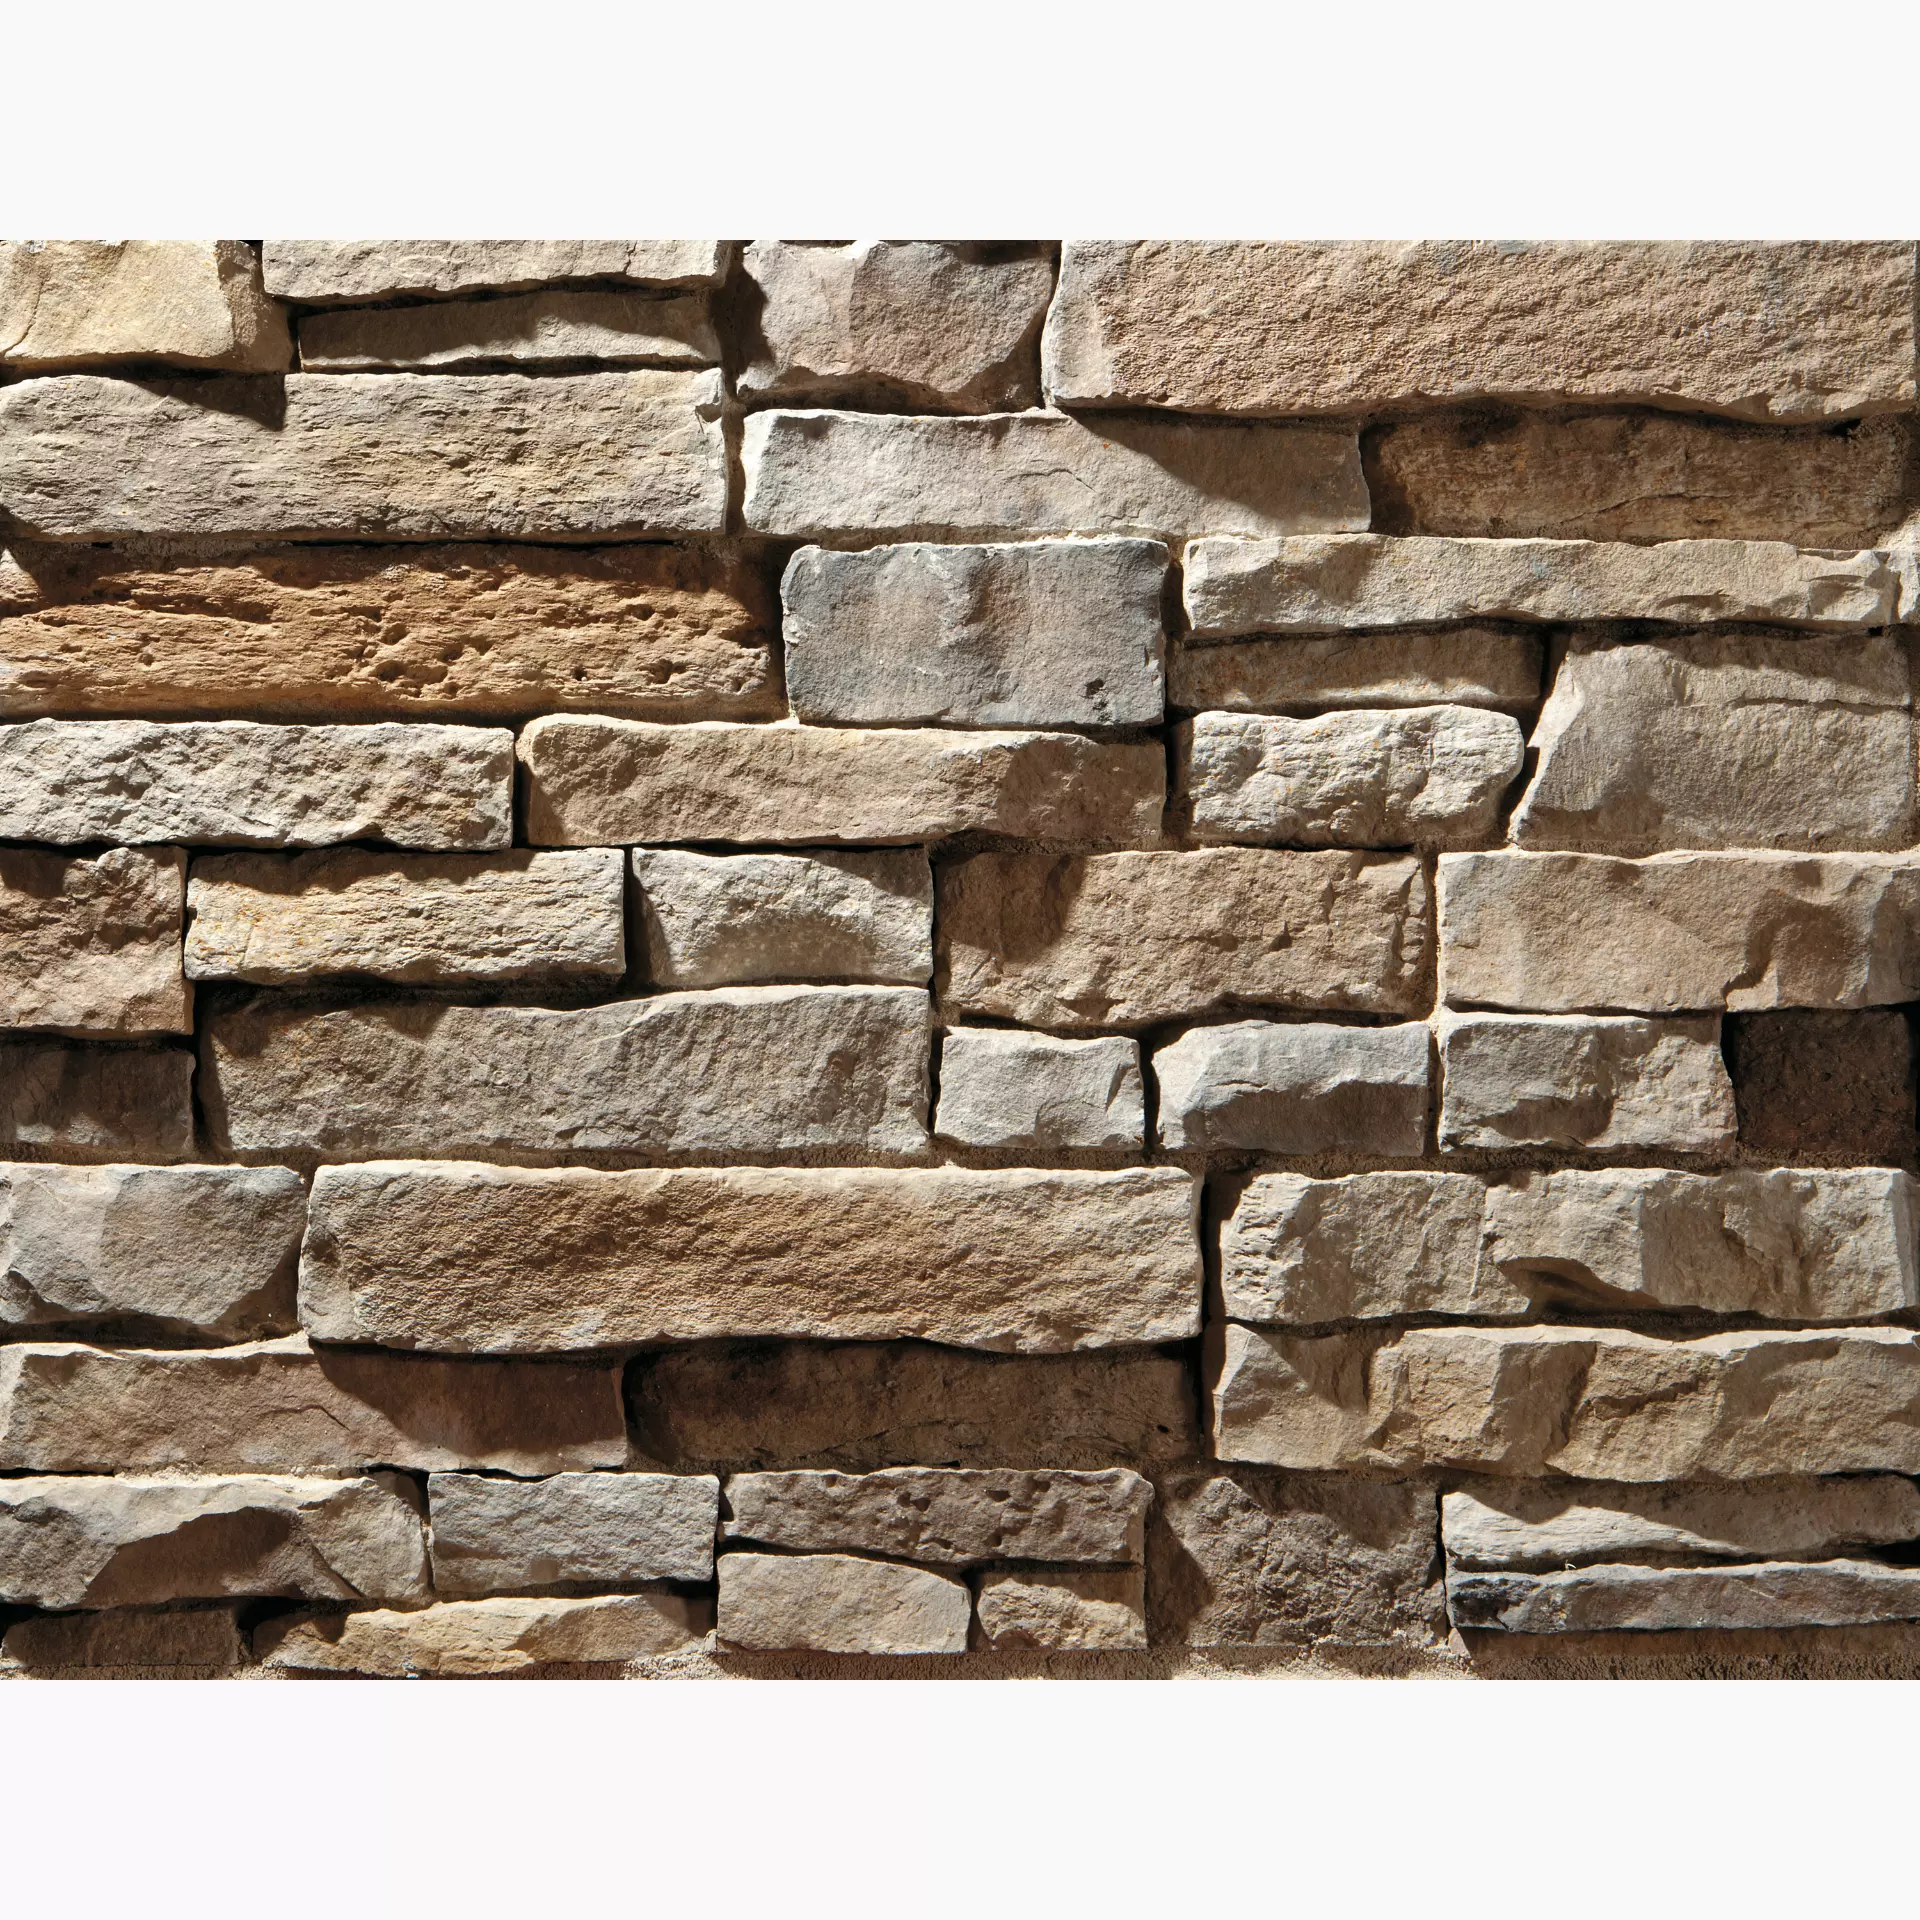 Geopietra Monte Panel Marrone Reale Thickness: 40-60mm PP12MR